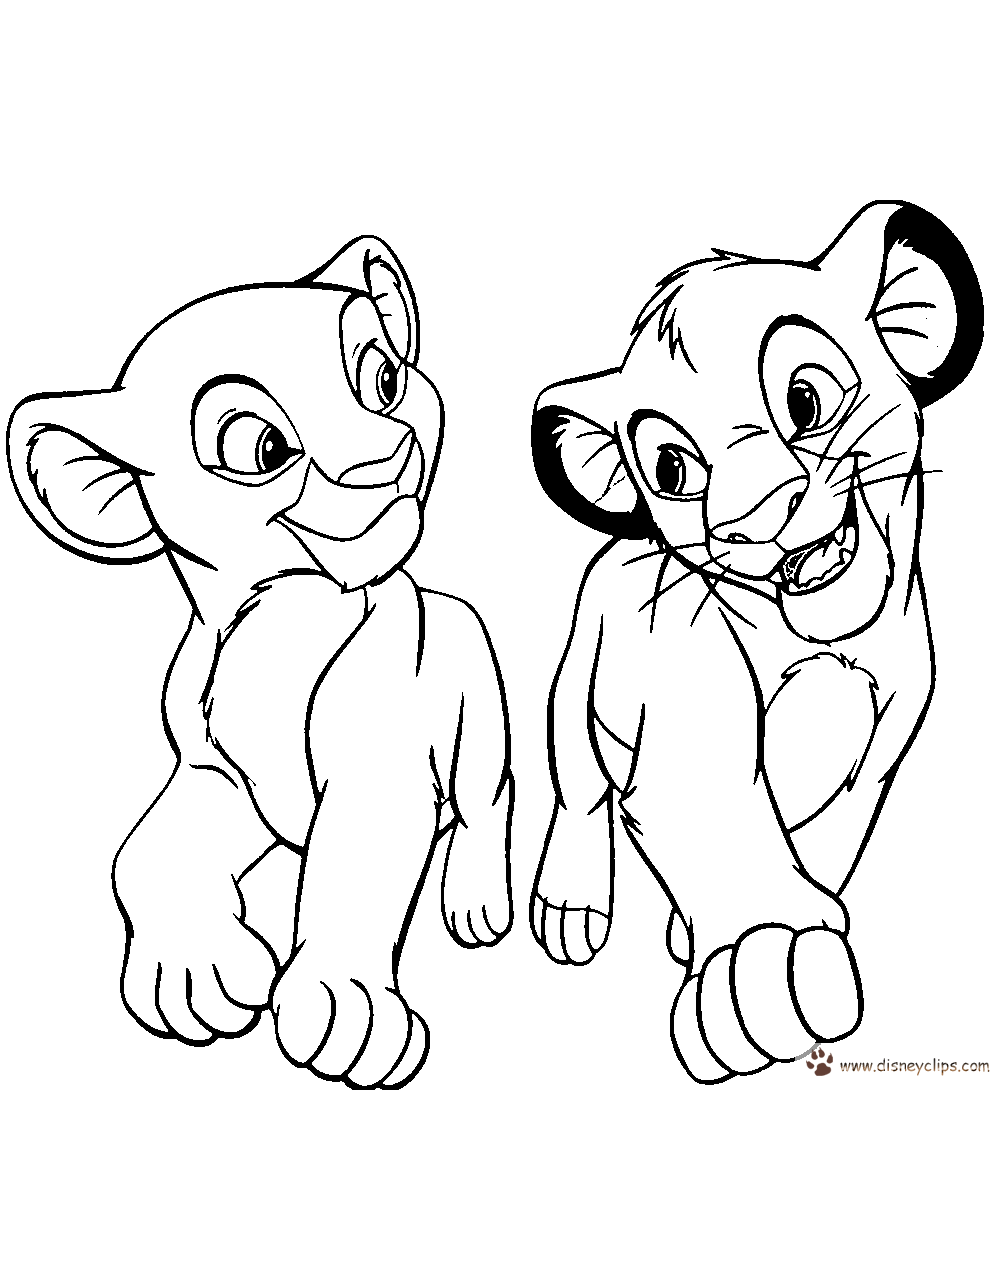 lion king coloring page fun learn free worksheets for kid ภาพระบายส the lion king page lion coloring 